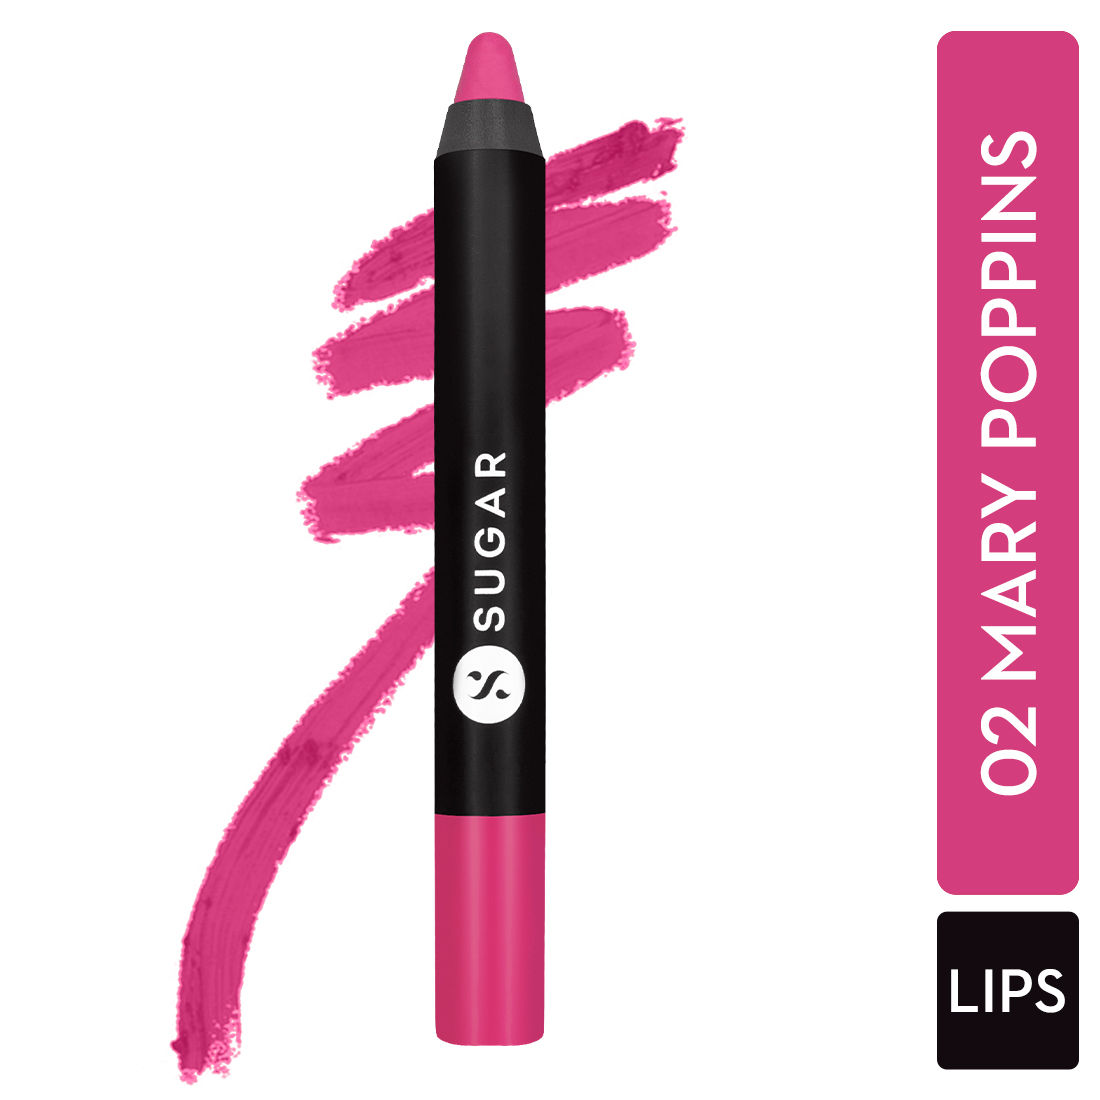 Buy SUGAR Cosmetics - Matte As Hell - Crayon Lipstick - 02 Mary Poppins (Fuchsia) - 2.8 gms - Bold and Silky Matte Finish Lipstick, Lightweight, Lasts Up to 12 hours - Purplle